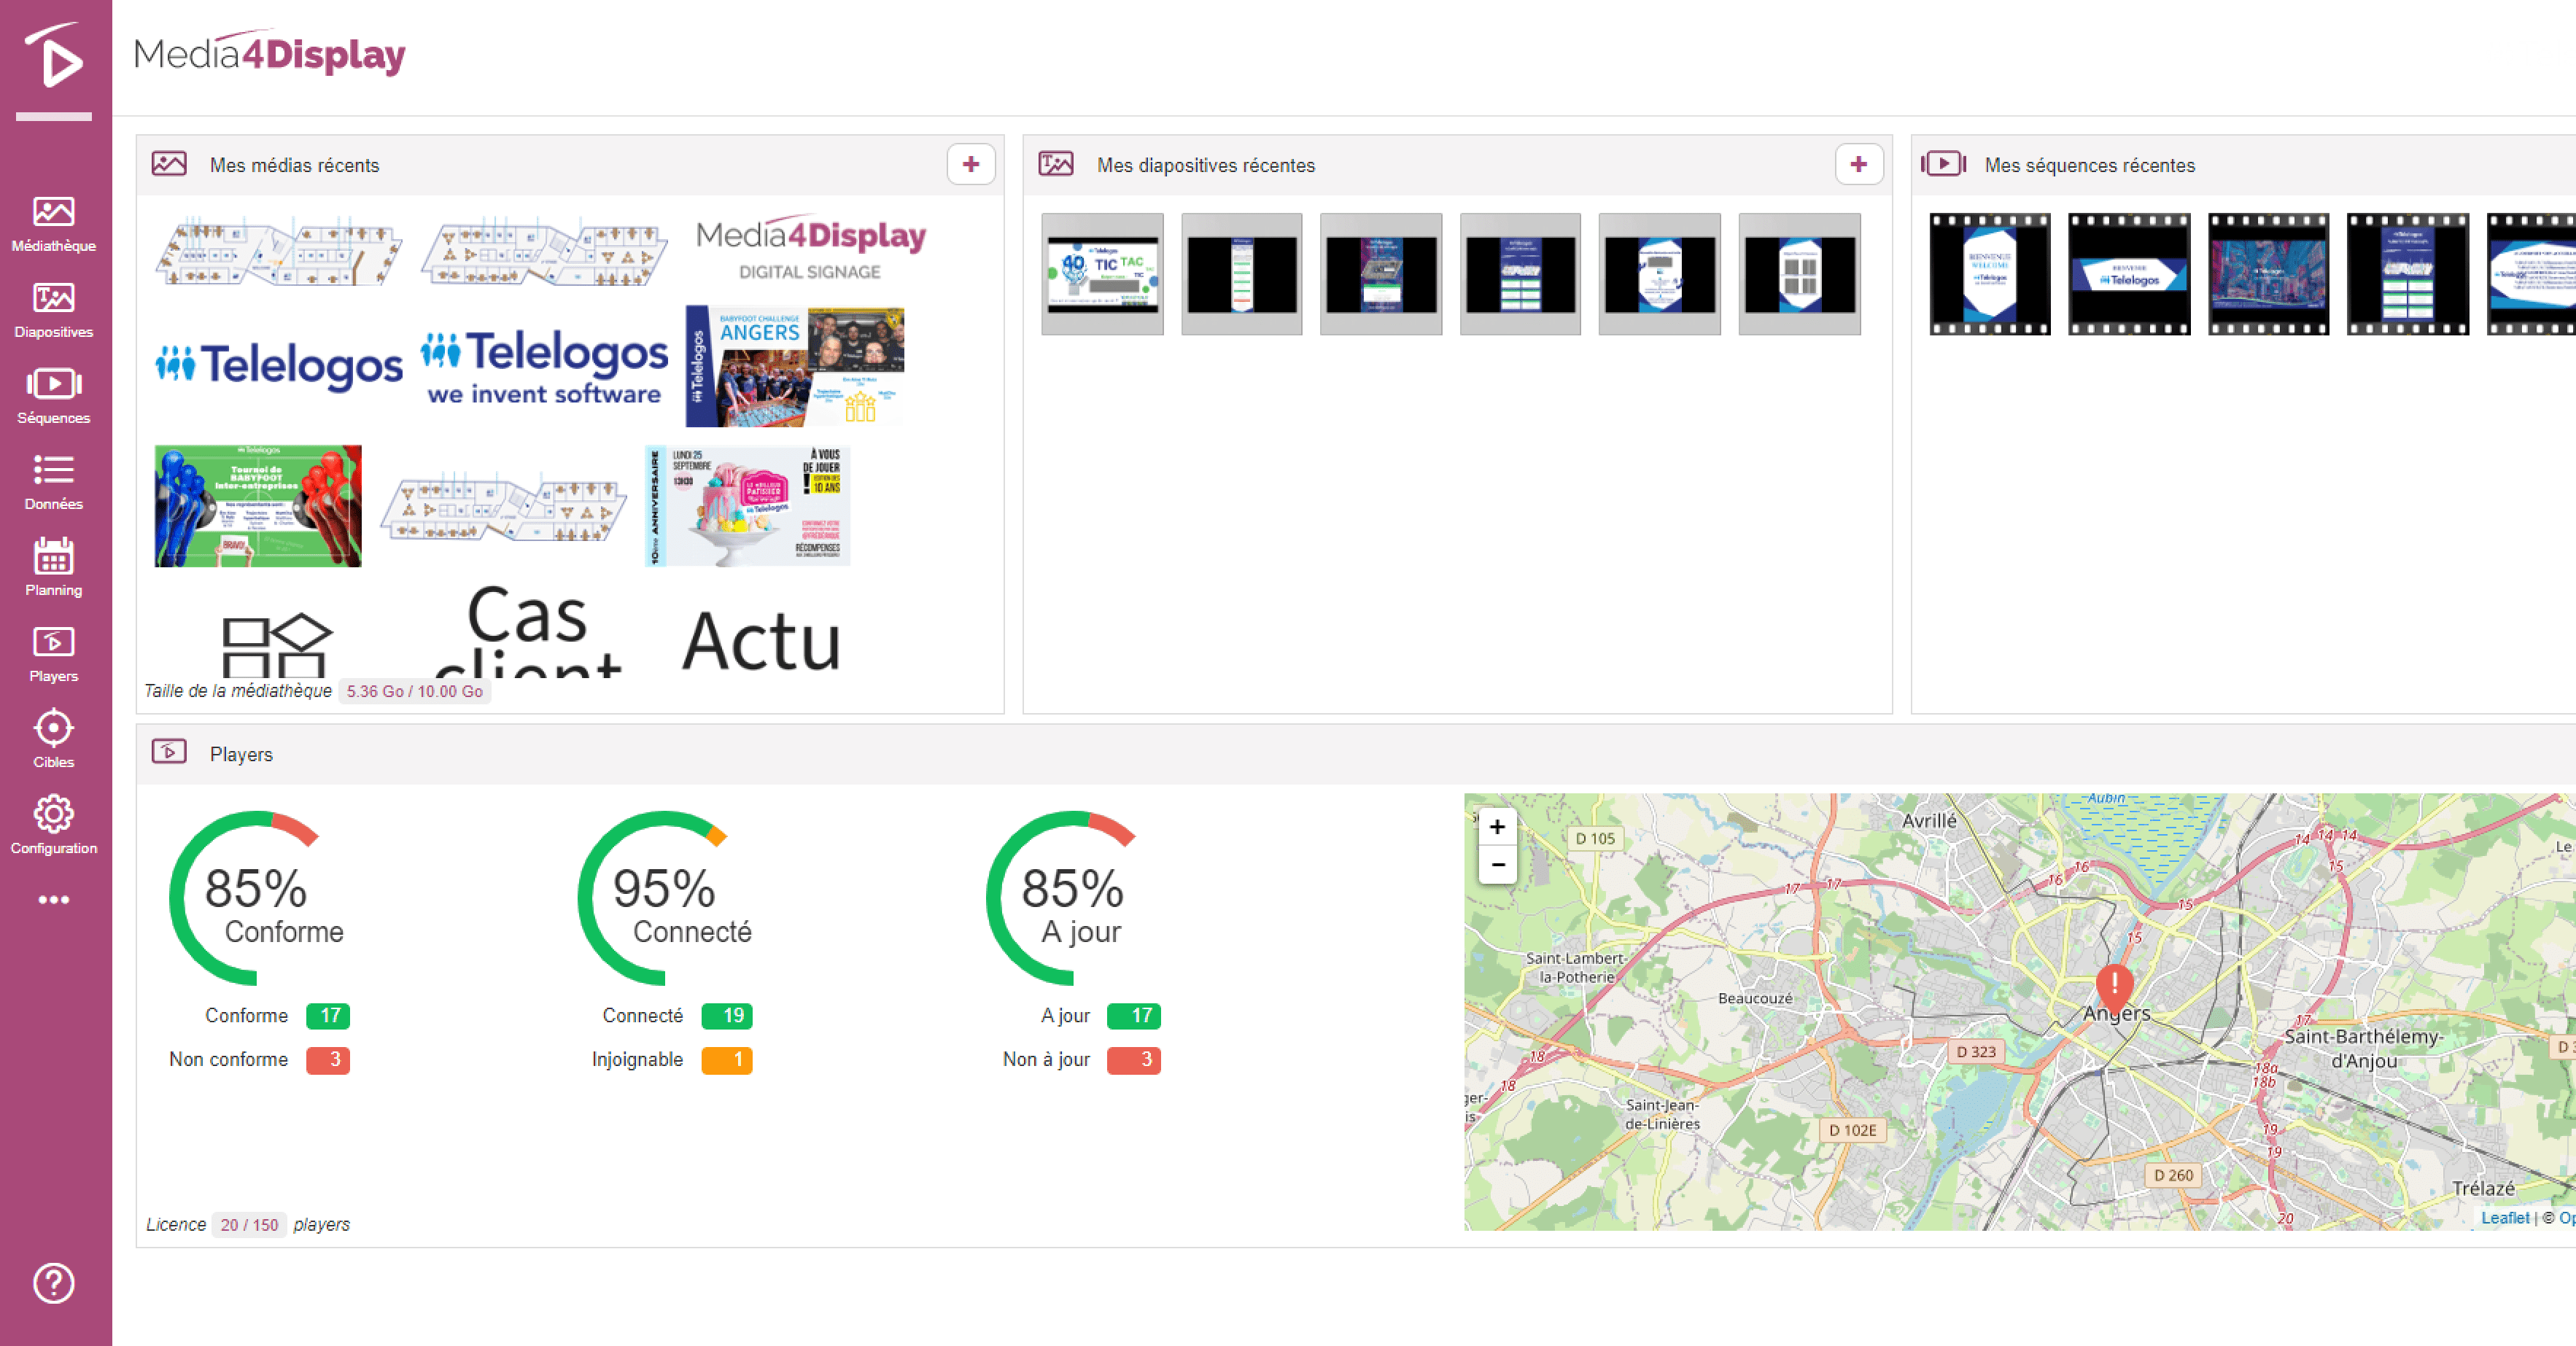 Media4Display - Home page and analytics